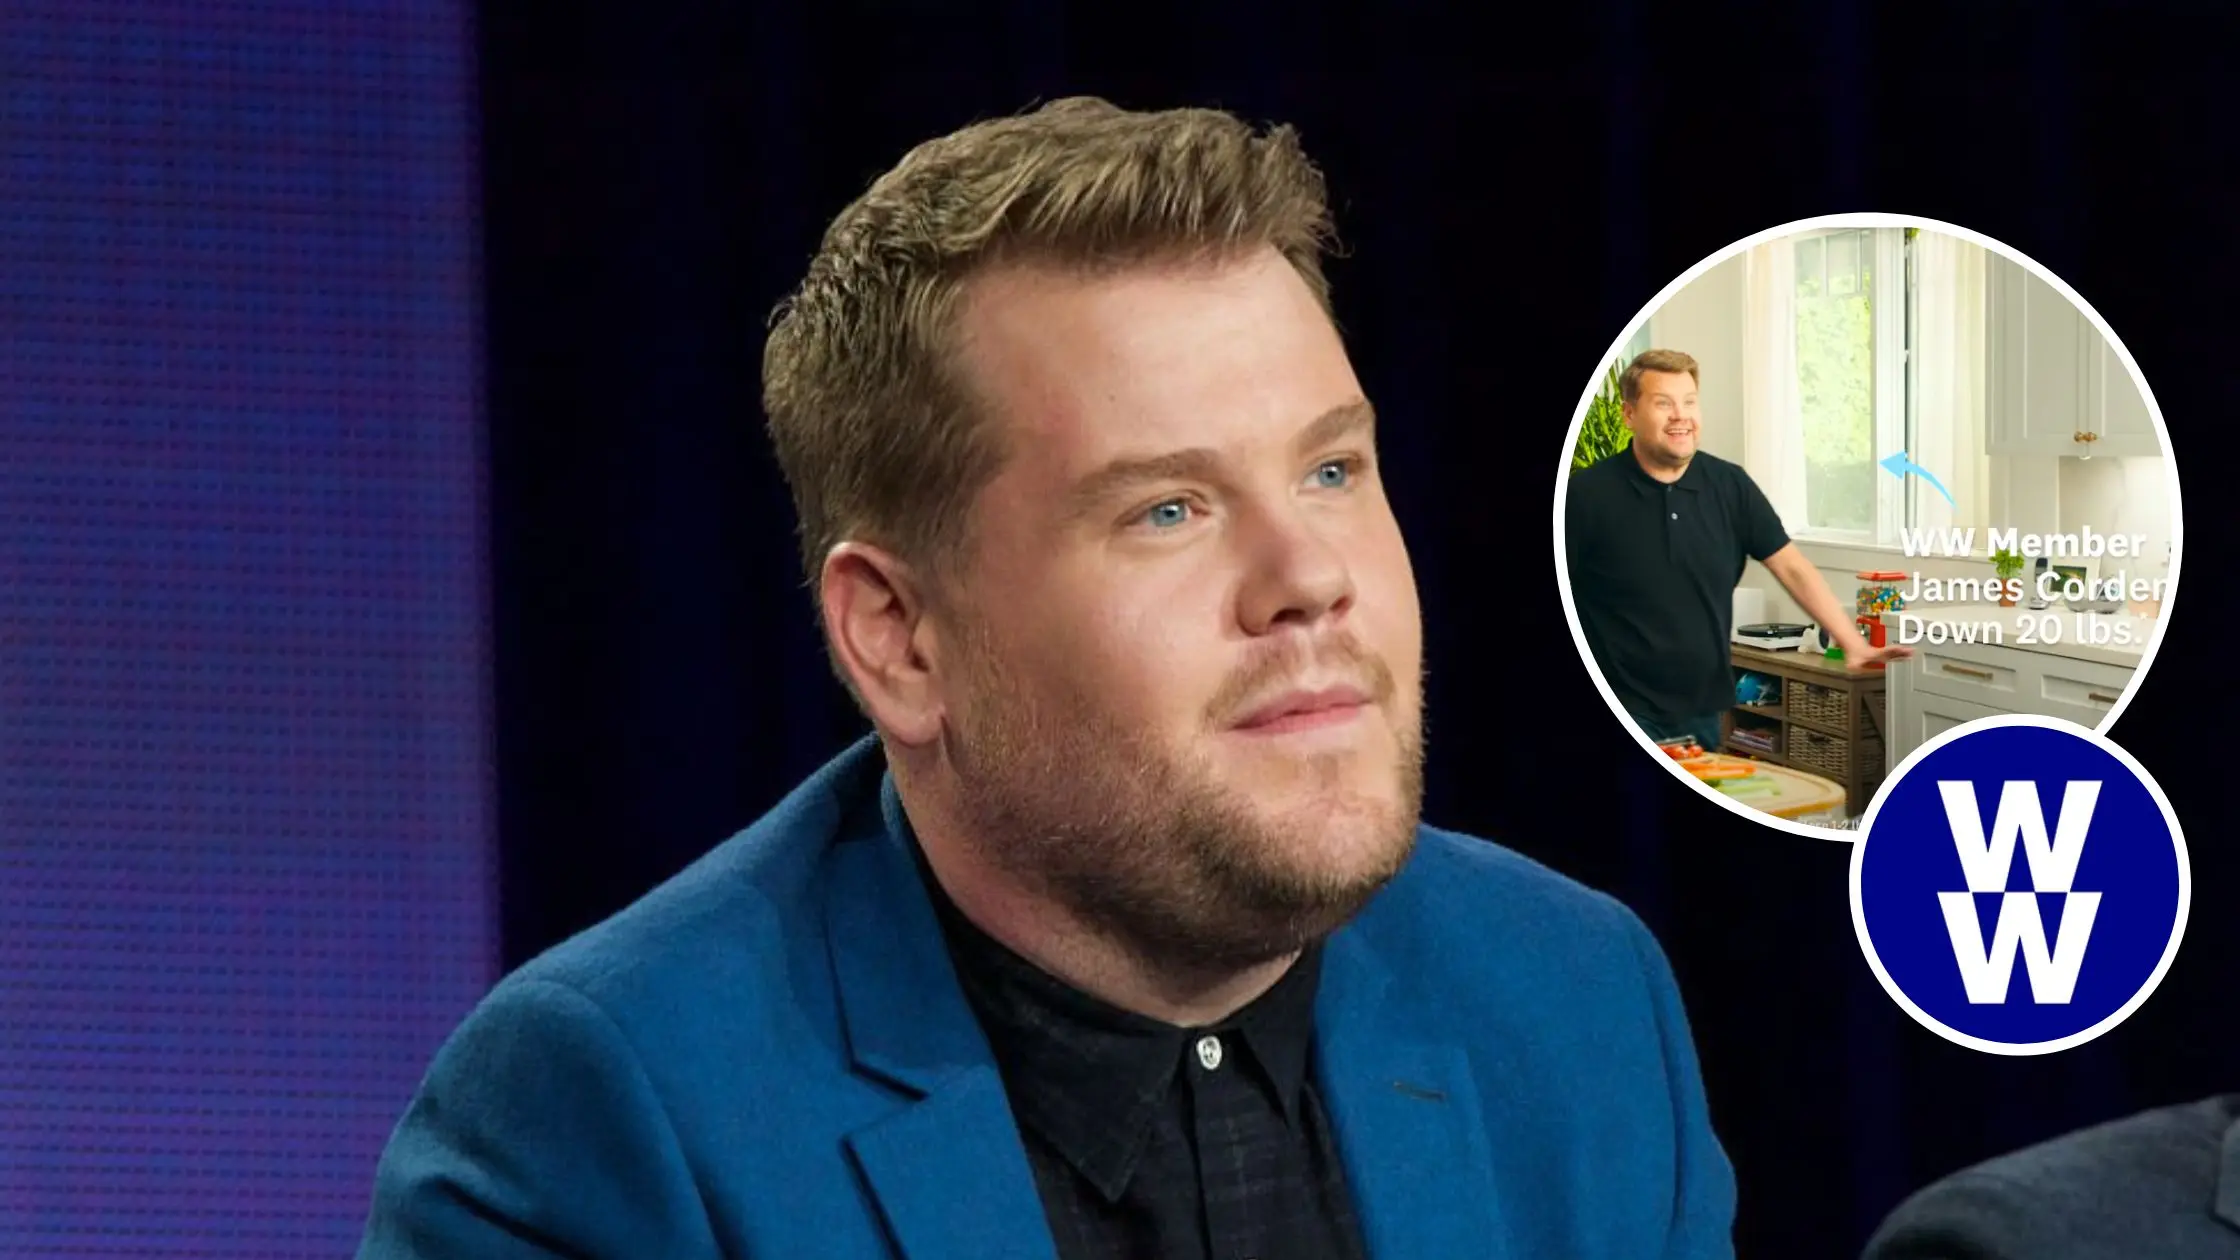 James Corden End His Partnership With Weight Watchers